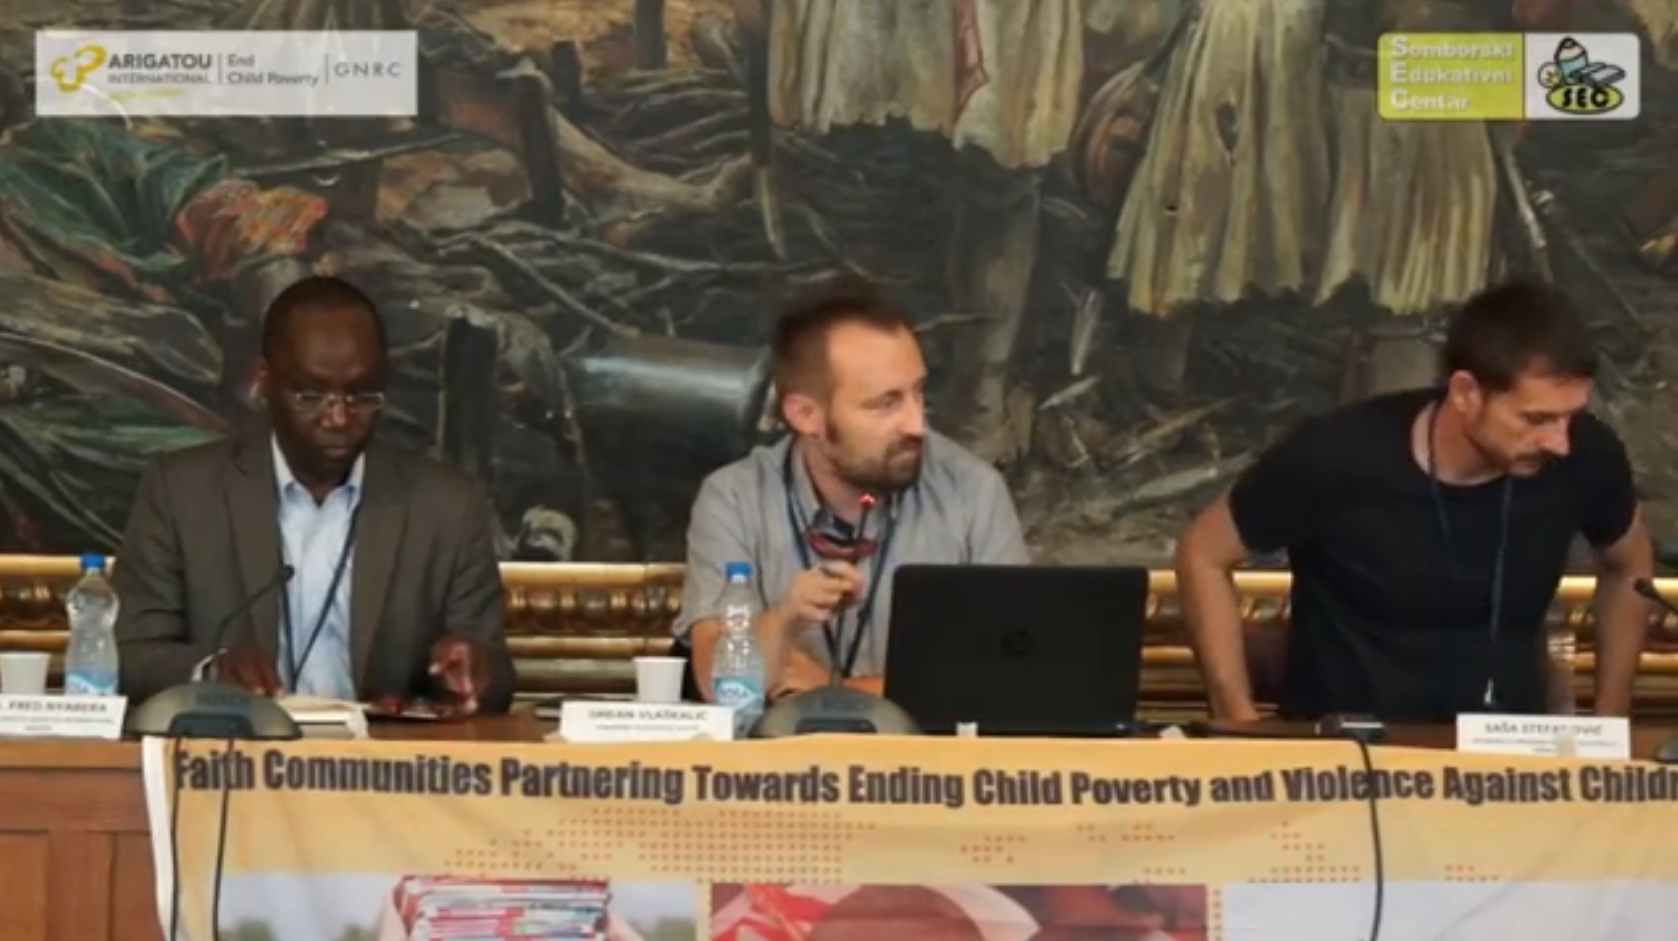 Partnership of religious communities to reduce child poverty and violence against children: Part 2